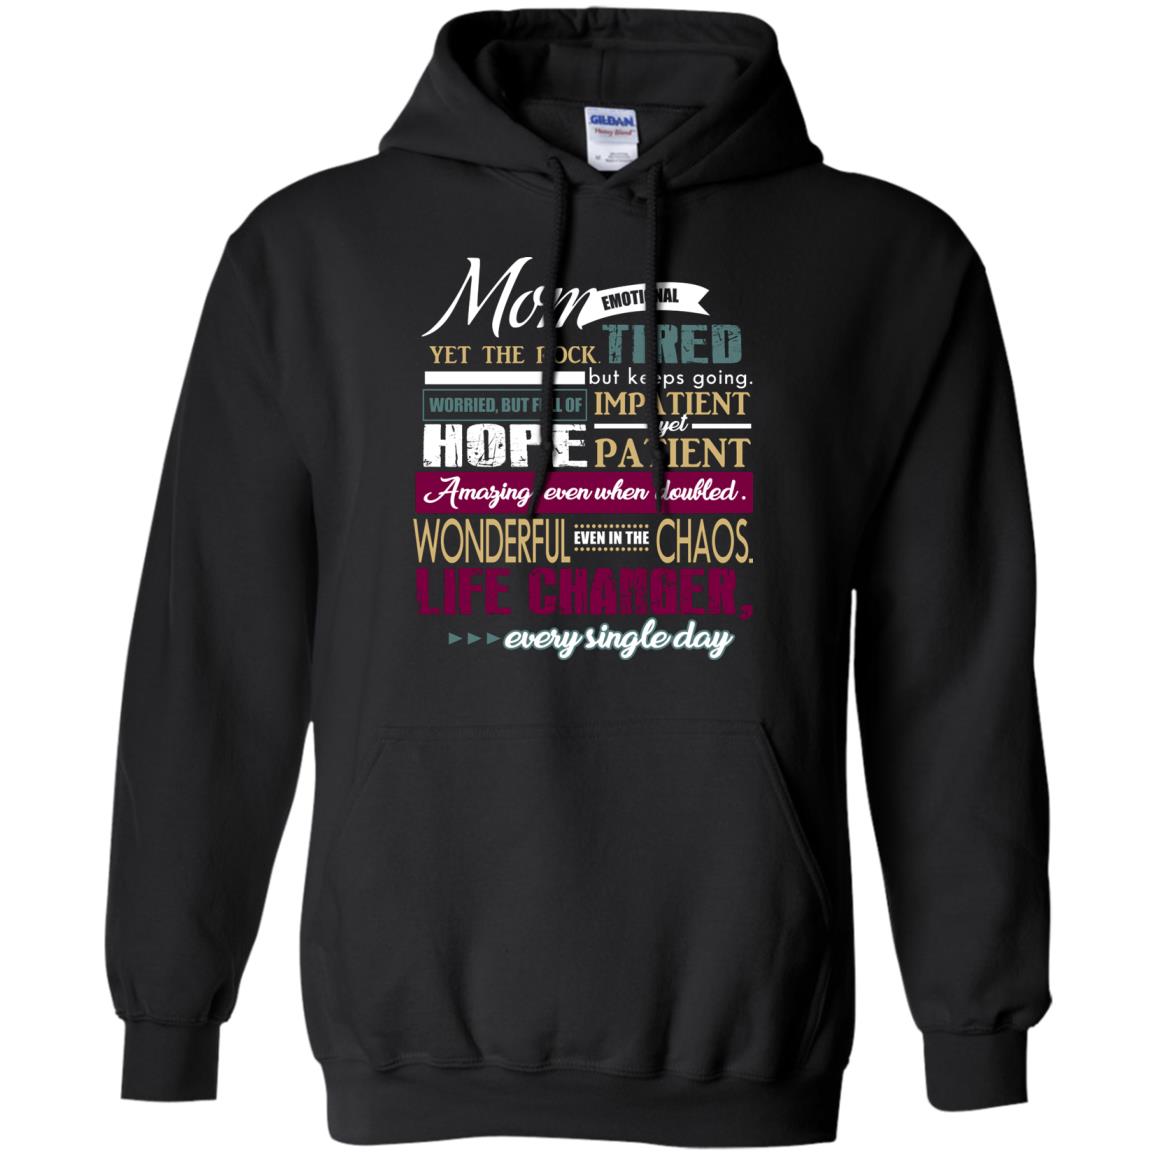 Mom Emotional Yet The Rock  Tired But Keeps Going Worried But Full Of Impatient Yet Hpoe Patient Amazing Even When Doubled Mommy ShirtG185 Gildan Pullover Hoodie 8 oz.